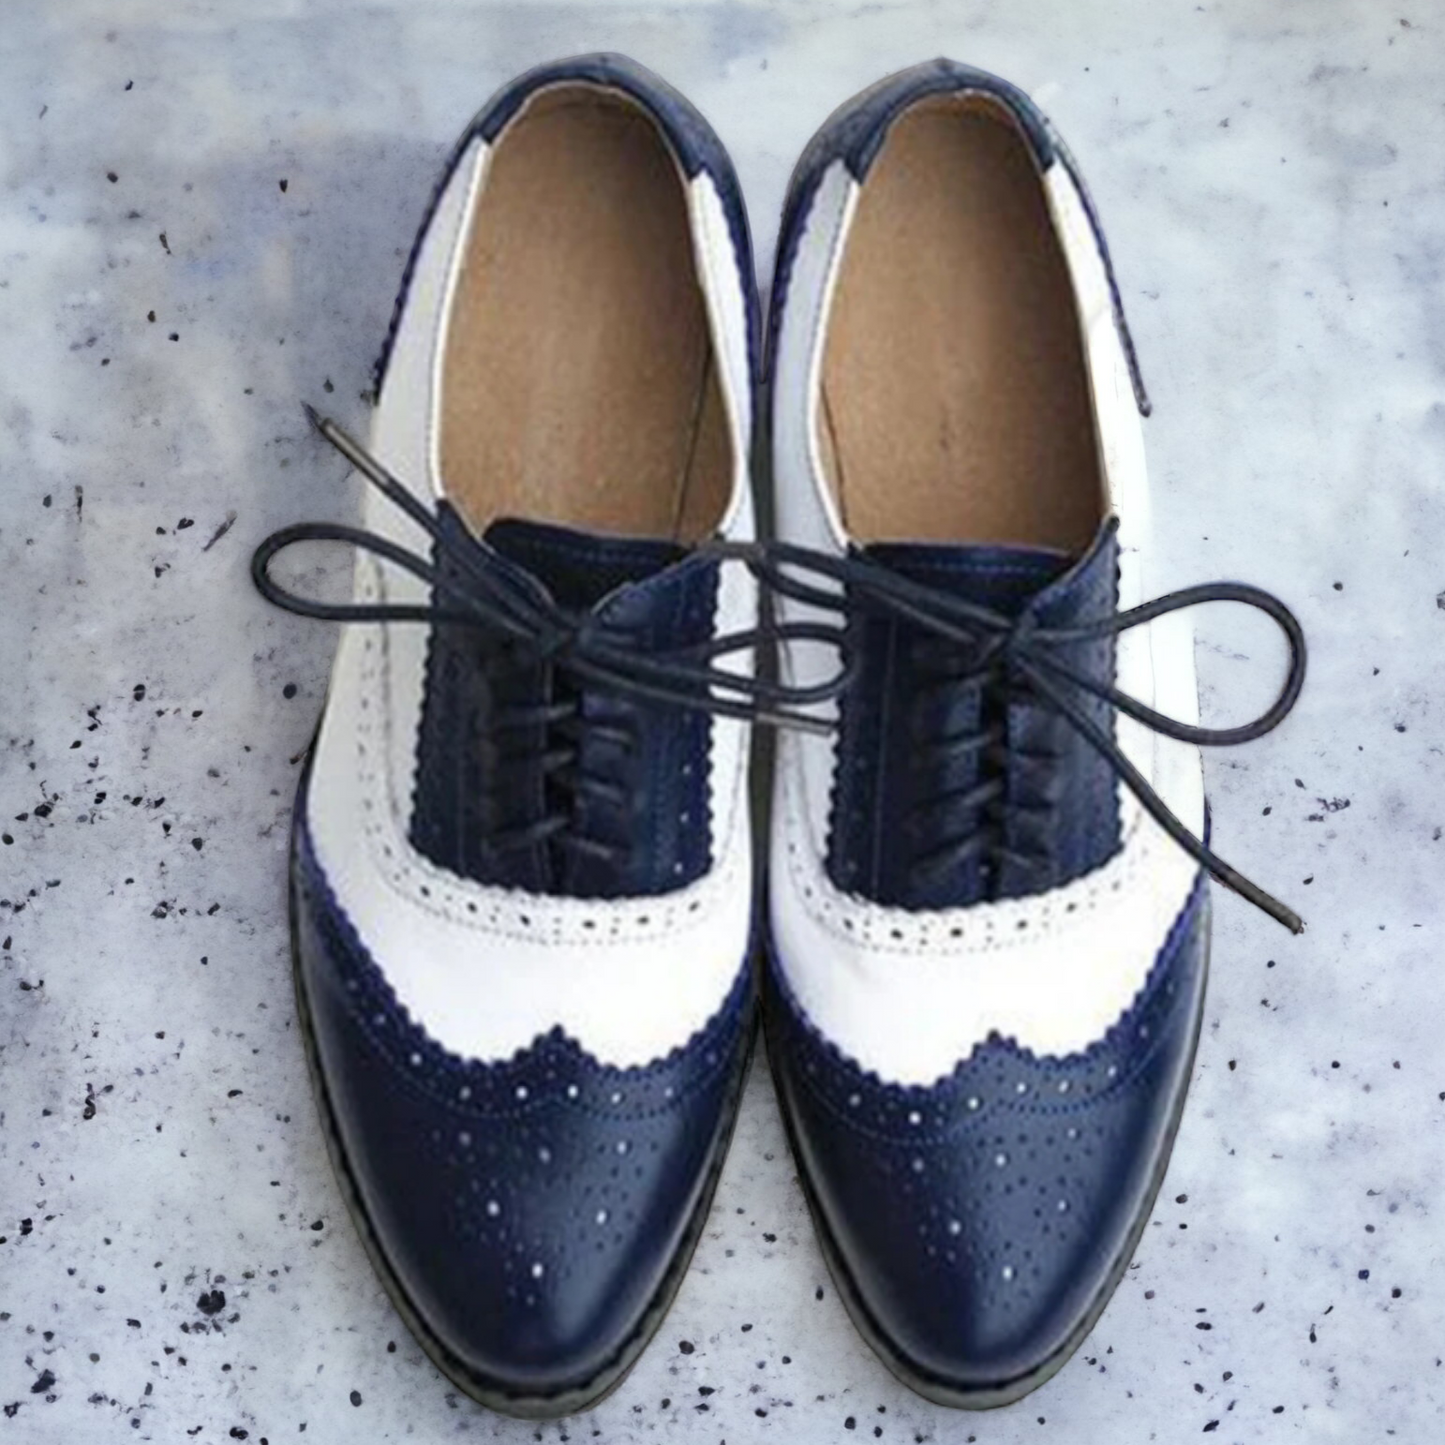 Oxford Shoes Vintage Handmade Genuine Leather For Women